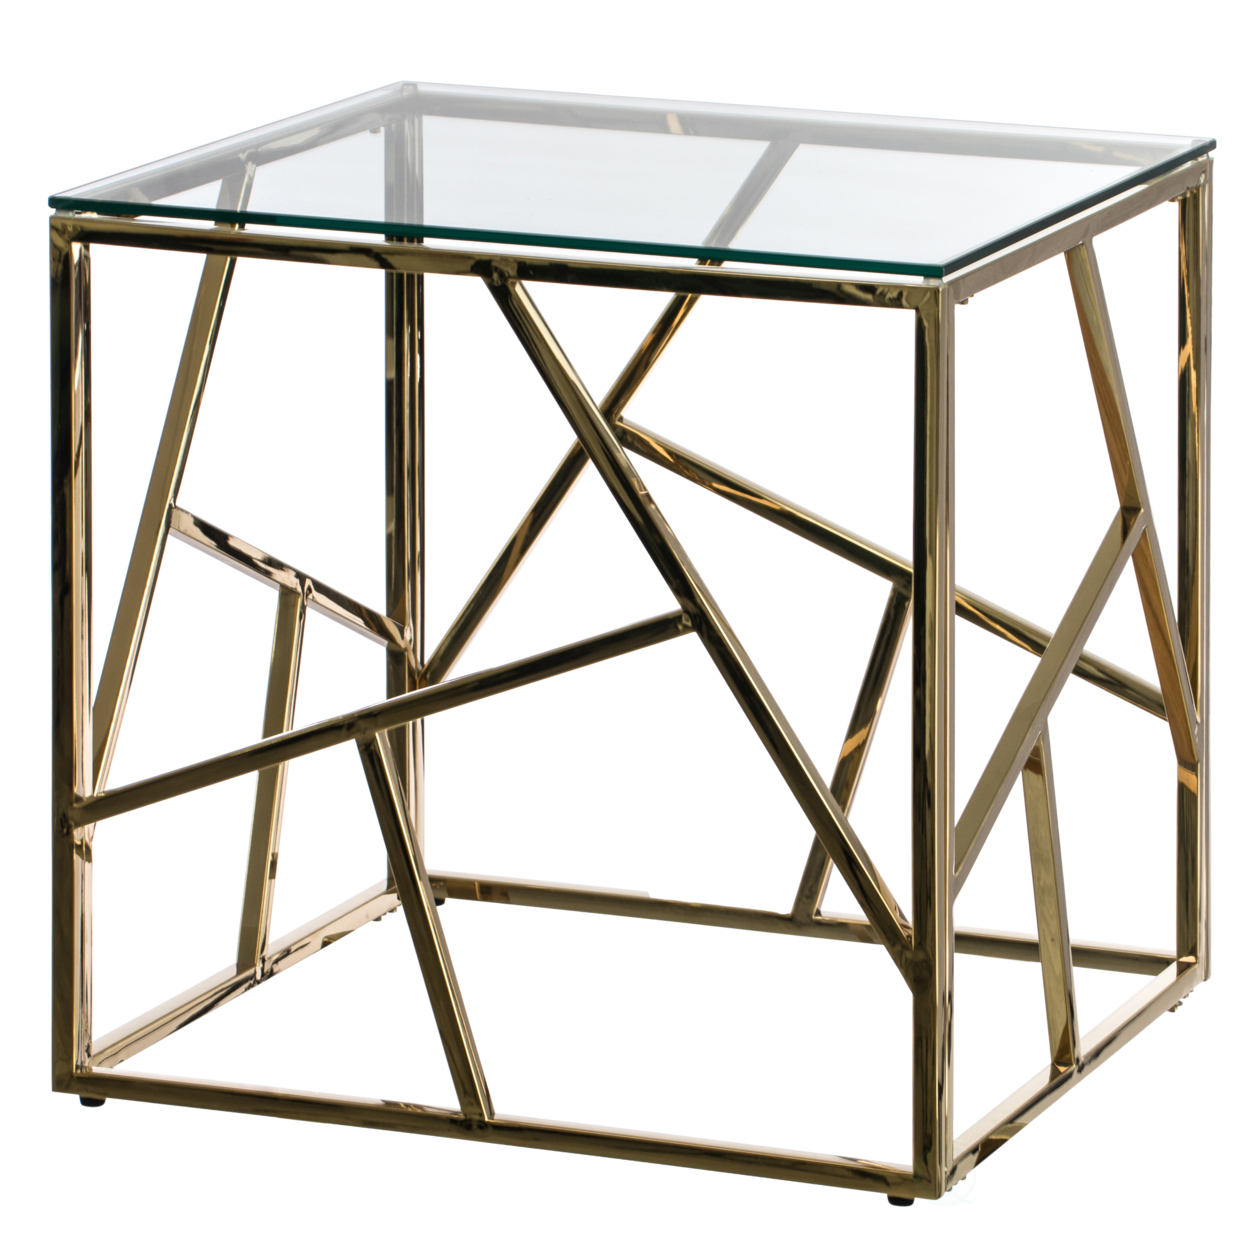 Modern Square End Side Table, Tempered Glass Top Metal Coffee Table - Silver